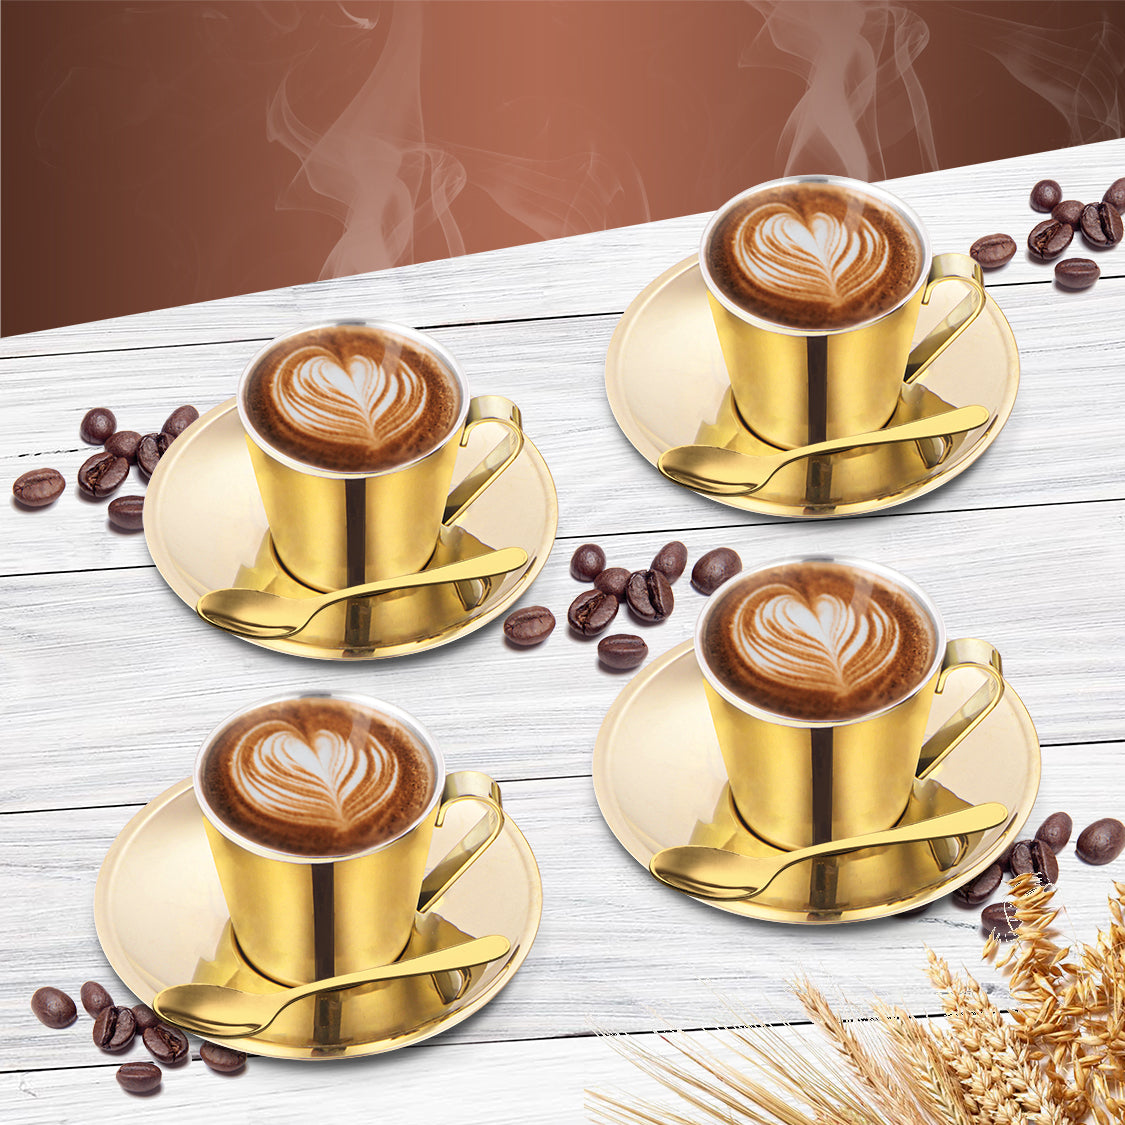 Stainless Steel 4 PCS Double Wall Cup and Saucer with Gold PVD Coating Rise